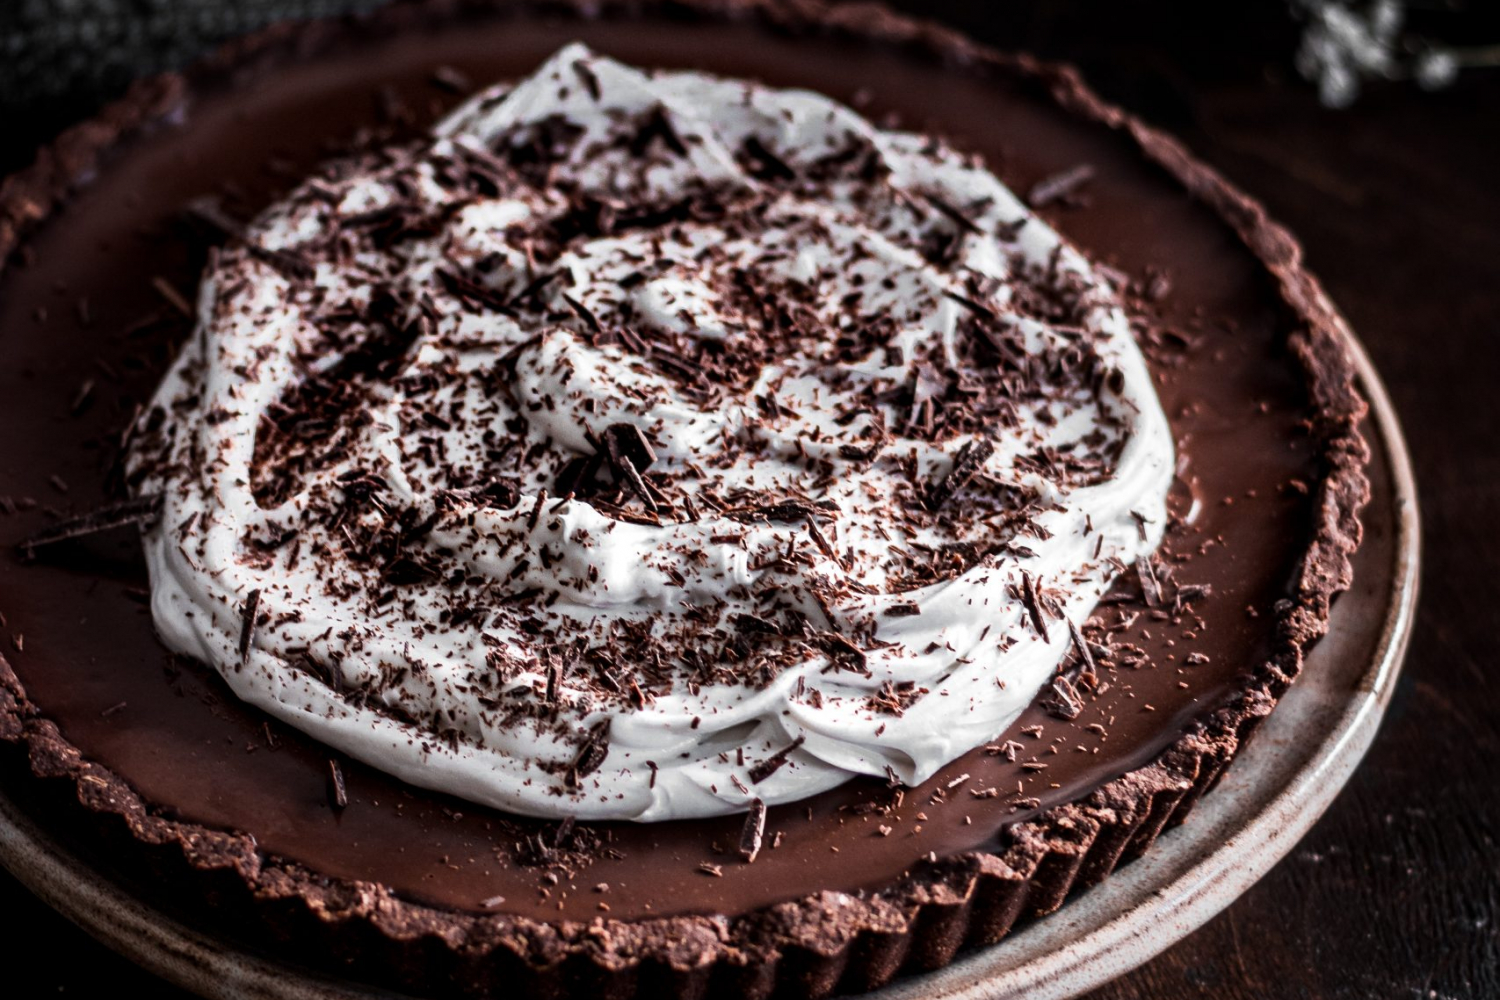 Chocolate Espresso Tart garnished with coconut whipped cream.